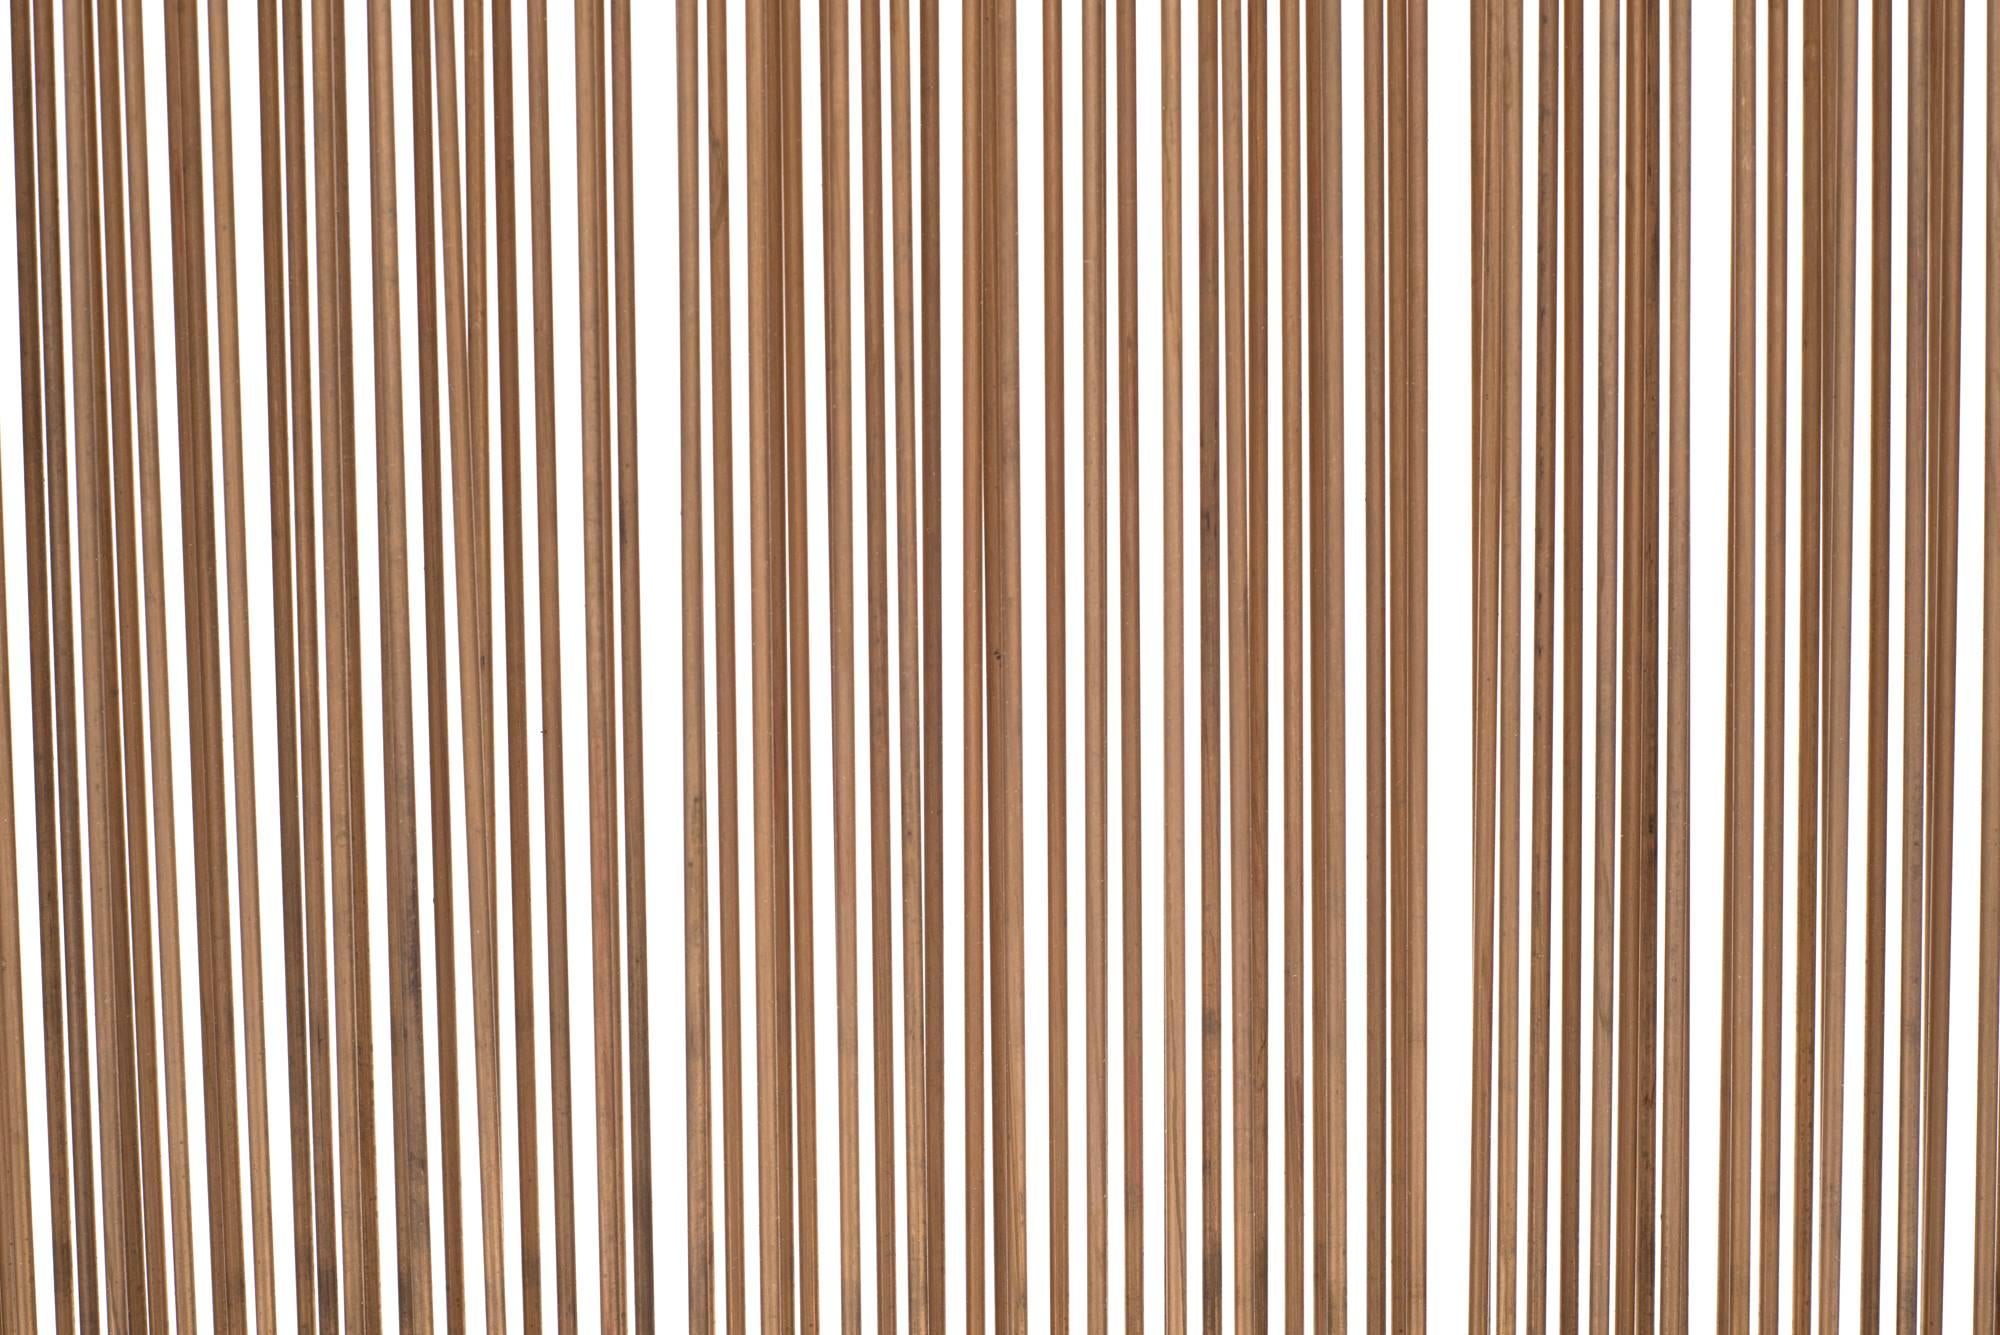 Contemporary Val Bertoia Linear Three Row Copper and Brass Sonambient Sculpture, USA